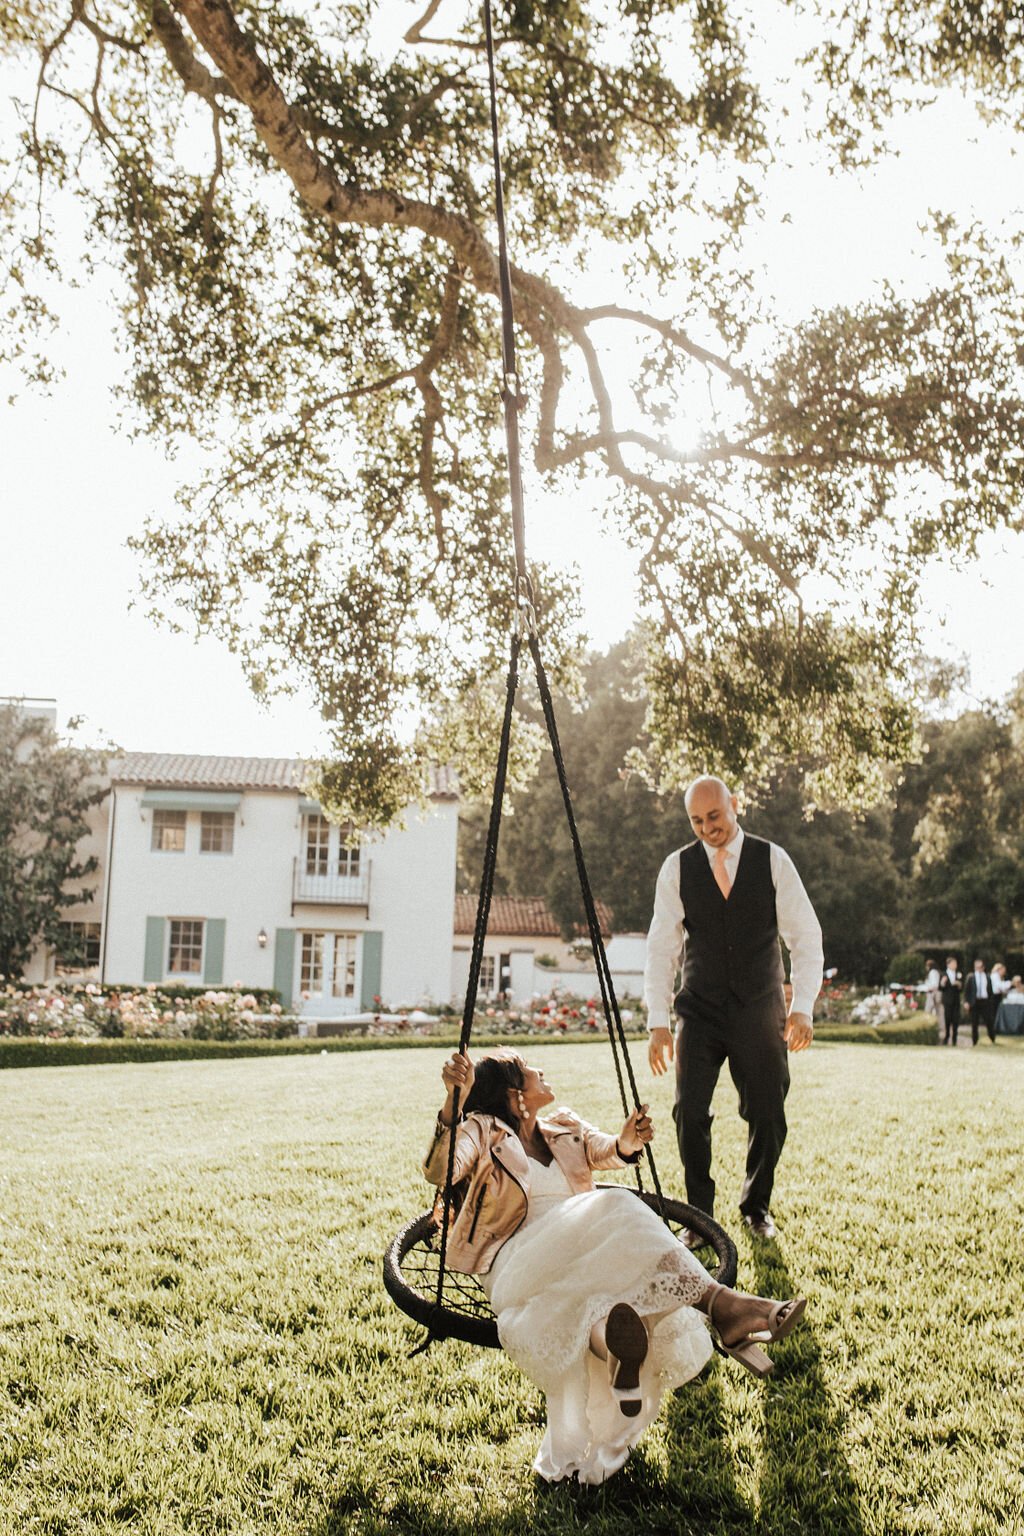 www.santabarbarawedding.com | The Indi Collective | Alpha Floral | Bride on the Swing in the Garden